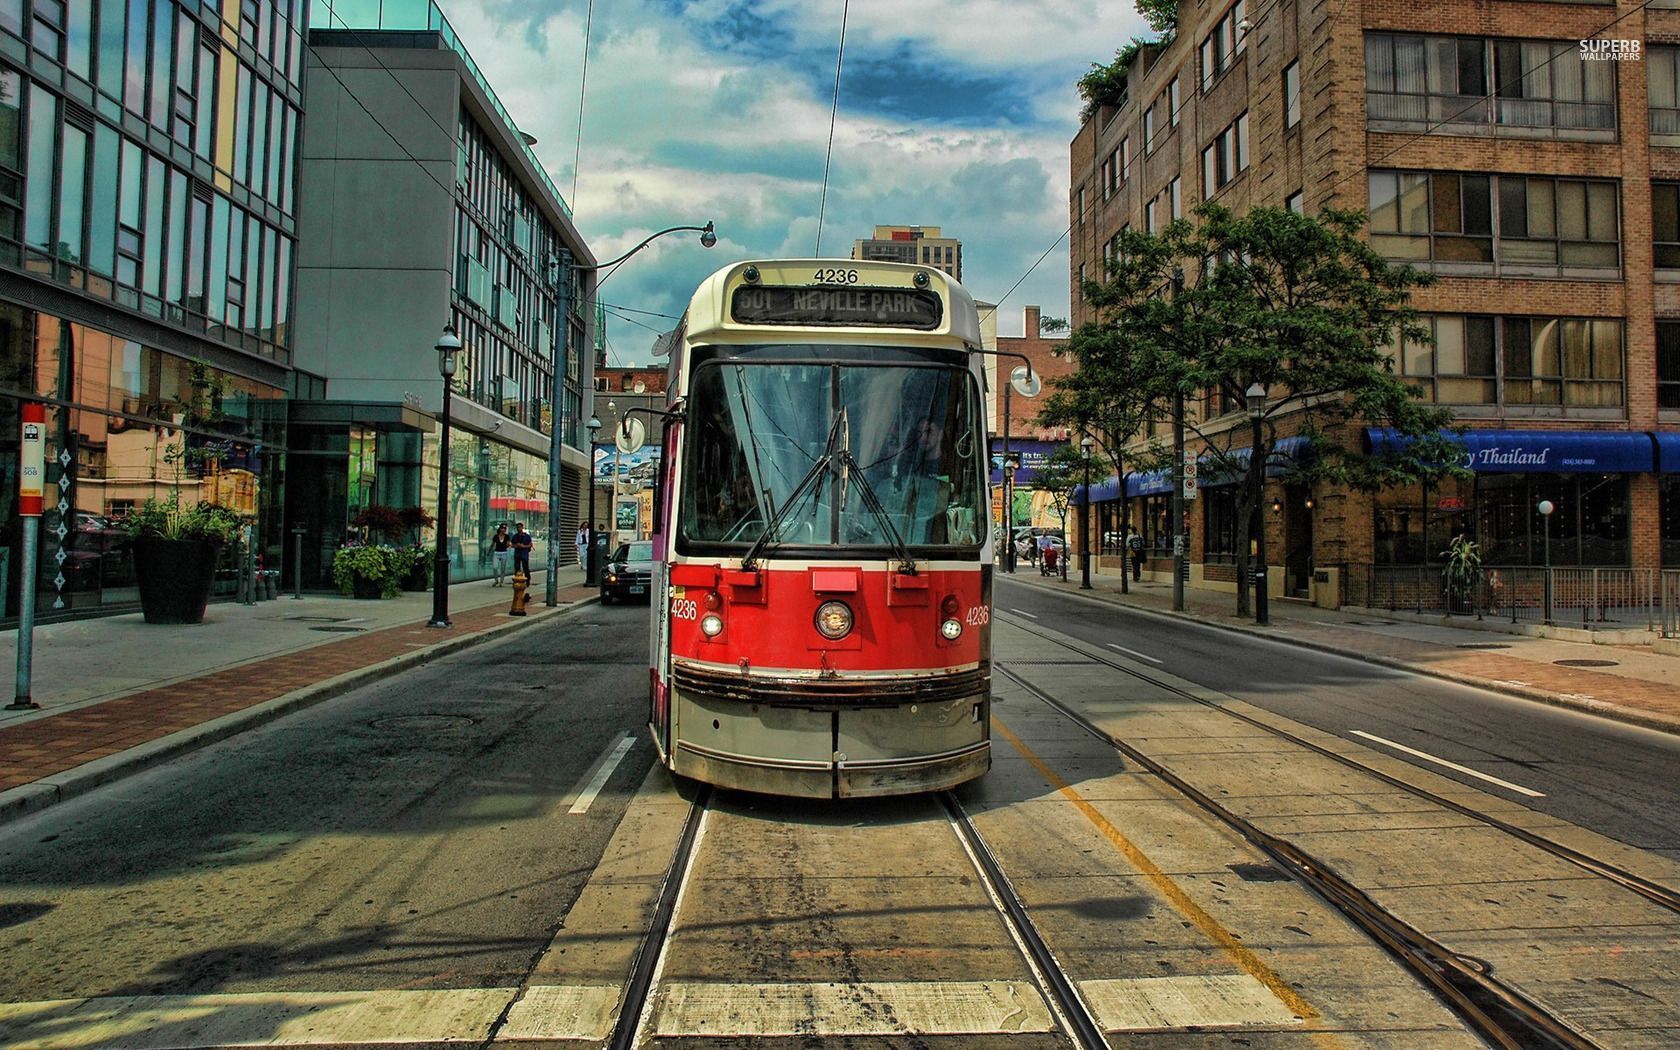 Tram in Toronto wallpaper - Photography wallpapers - #38610